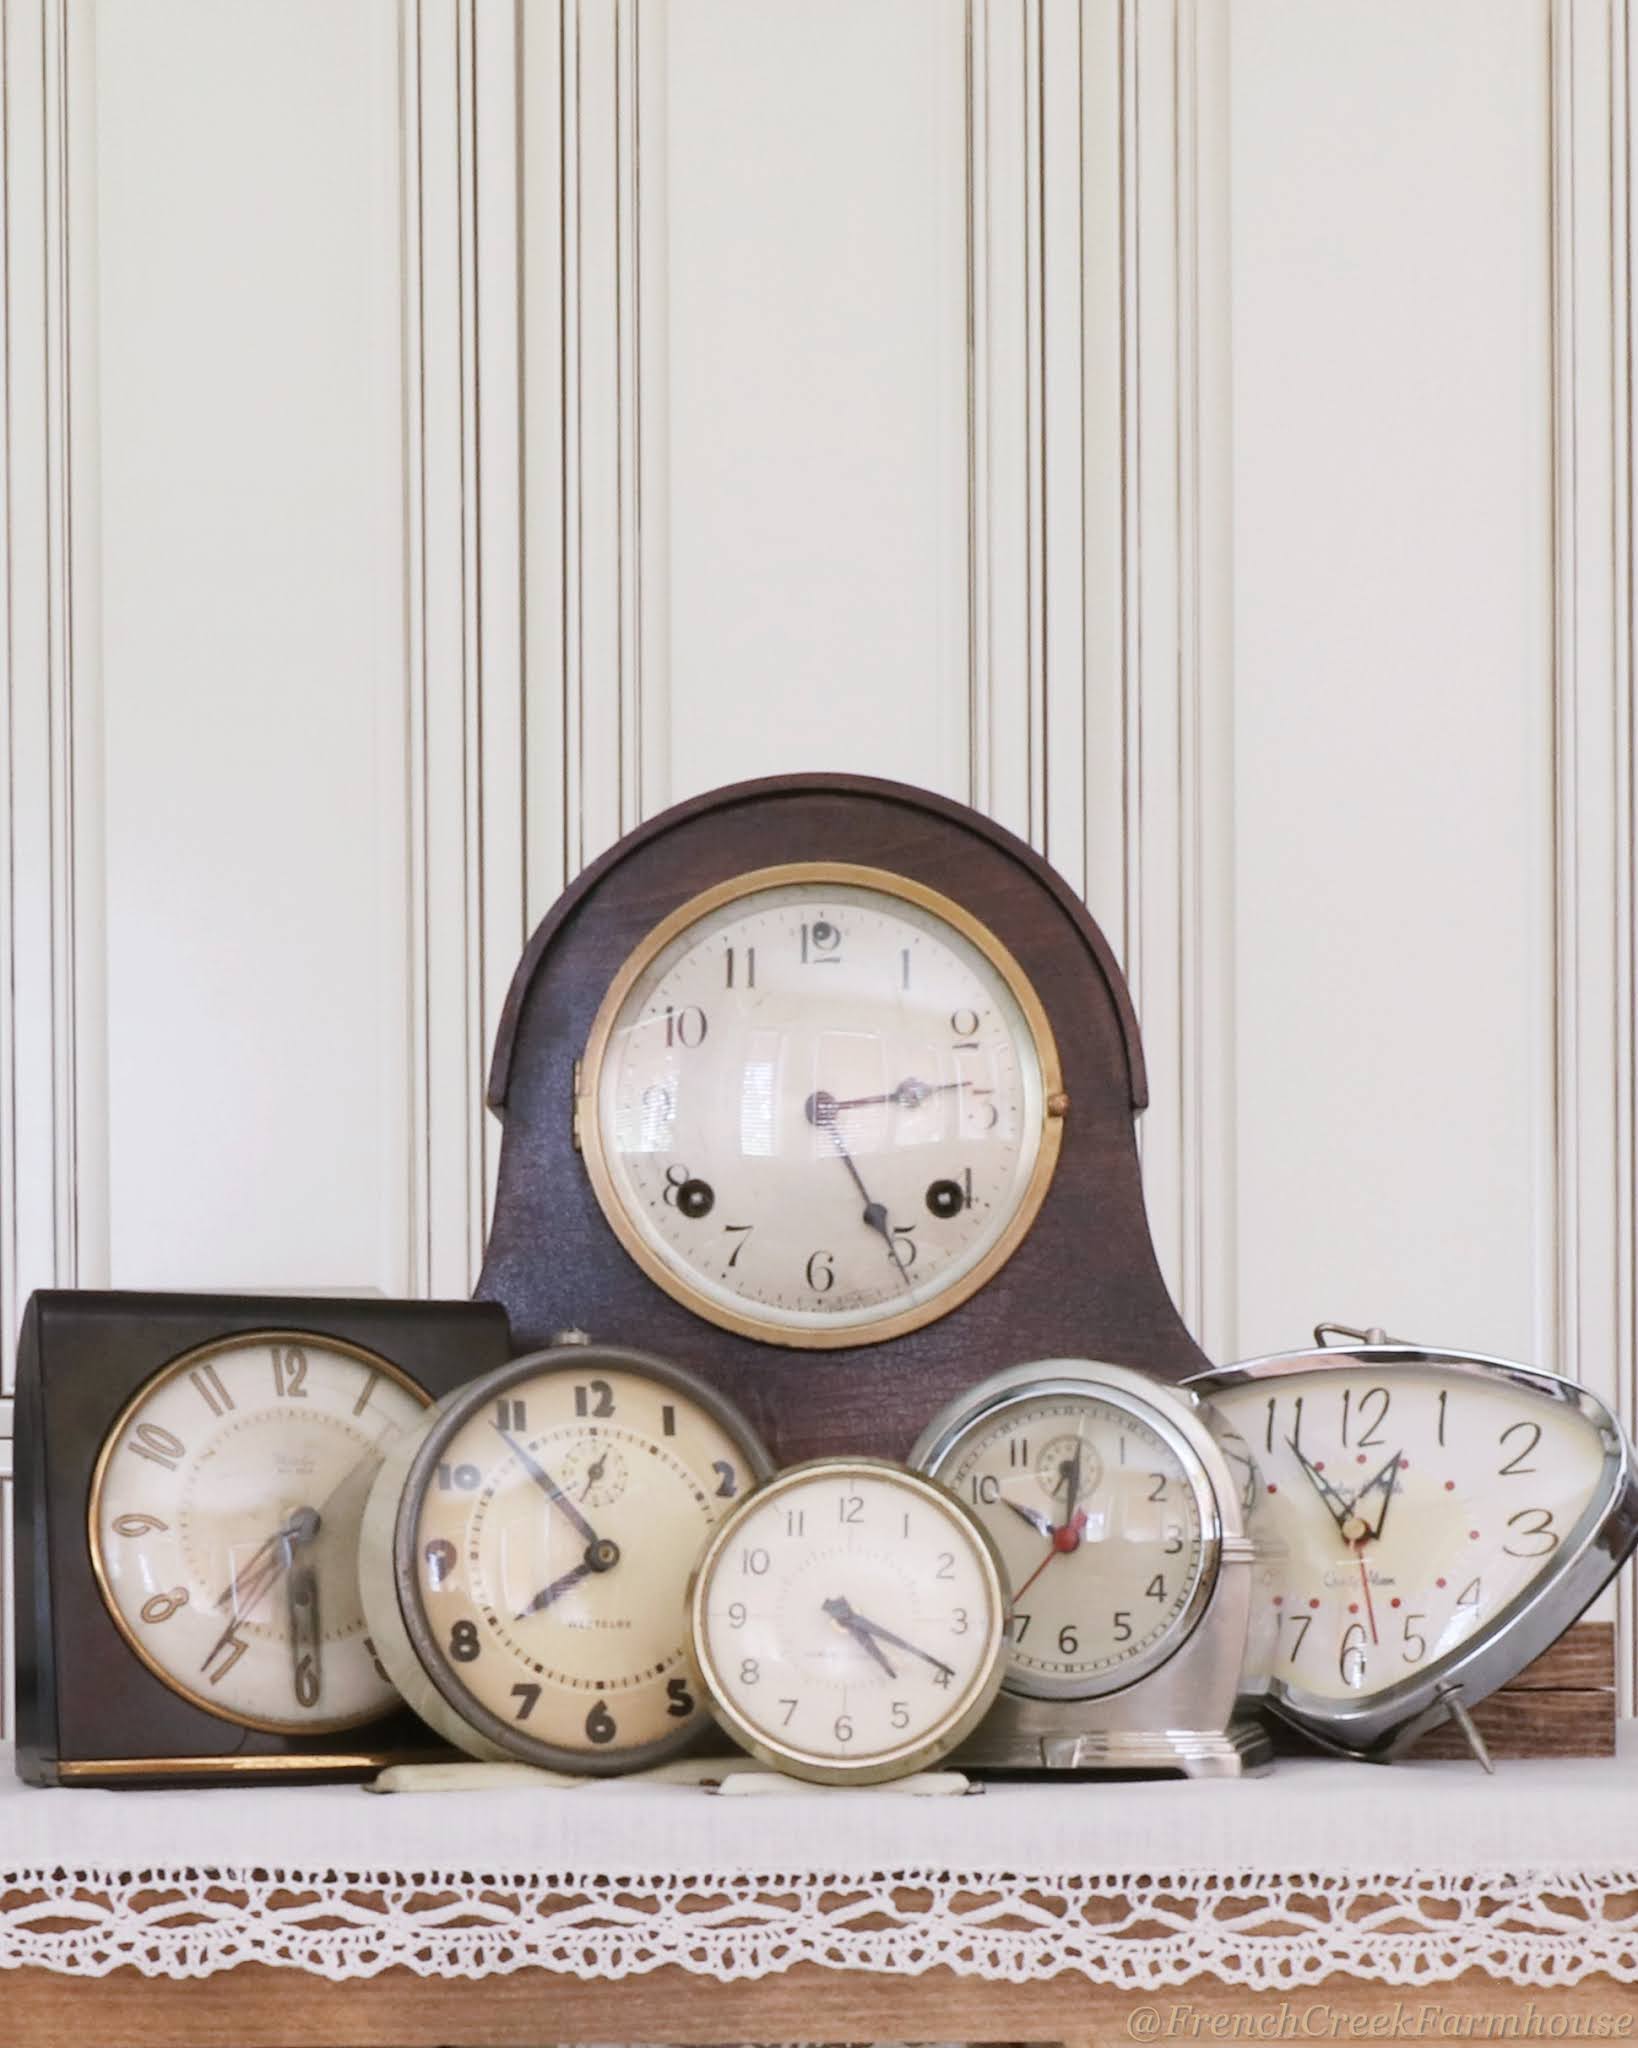 A collection of vintage clocks will make a statement in your neutral decor